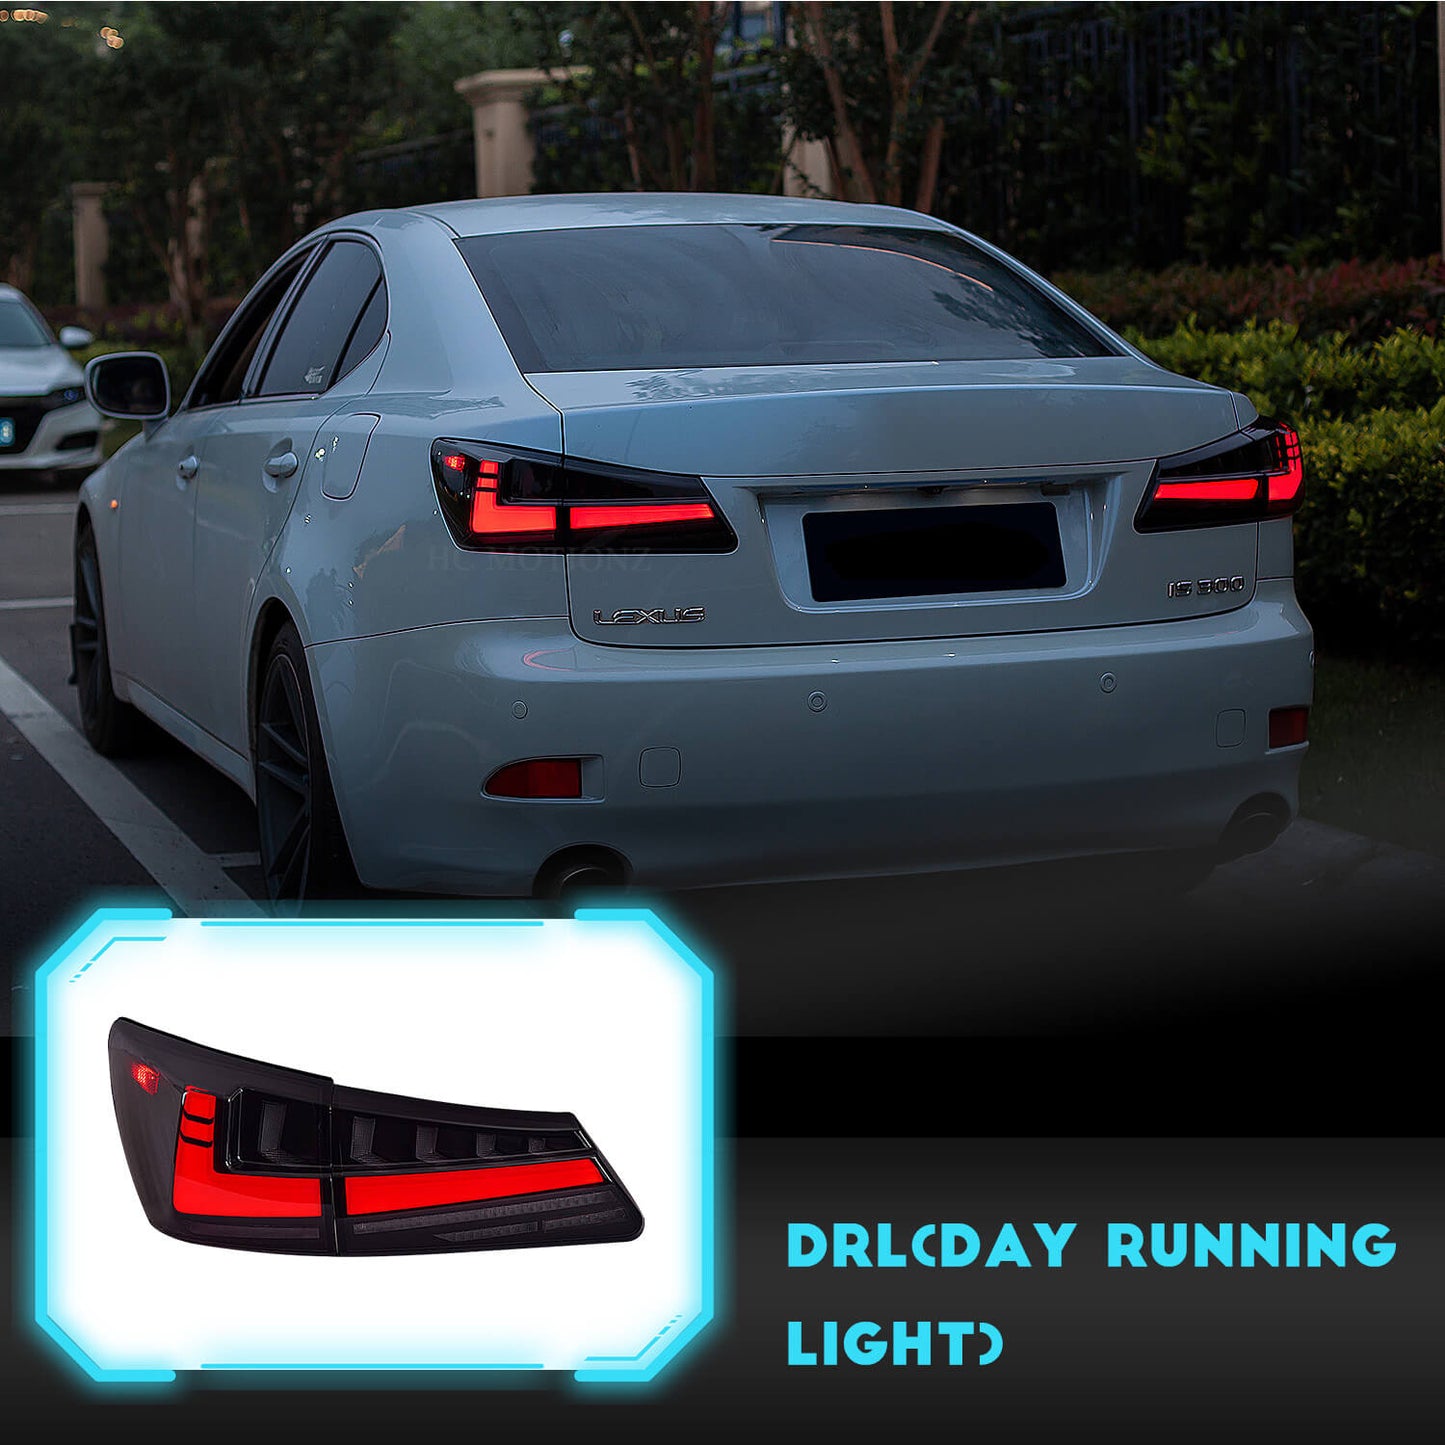 HCMOTION LED Tail Light For Lexus IS250 IS350 ISF 2006-2012